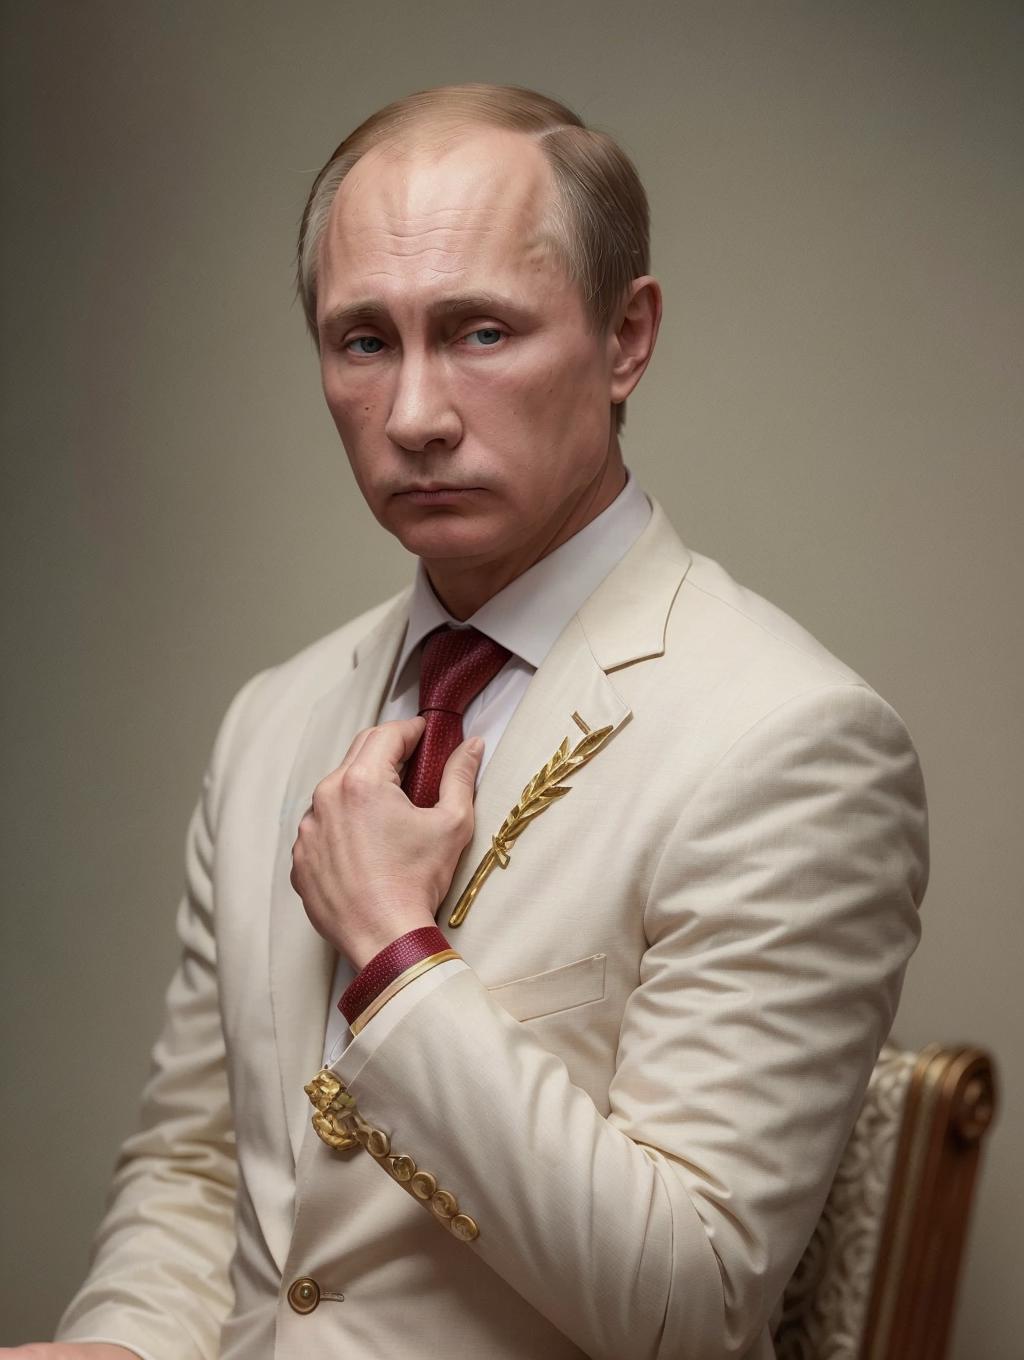 Russian President Vladimir Putin in a White Suit and Maroon Tie